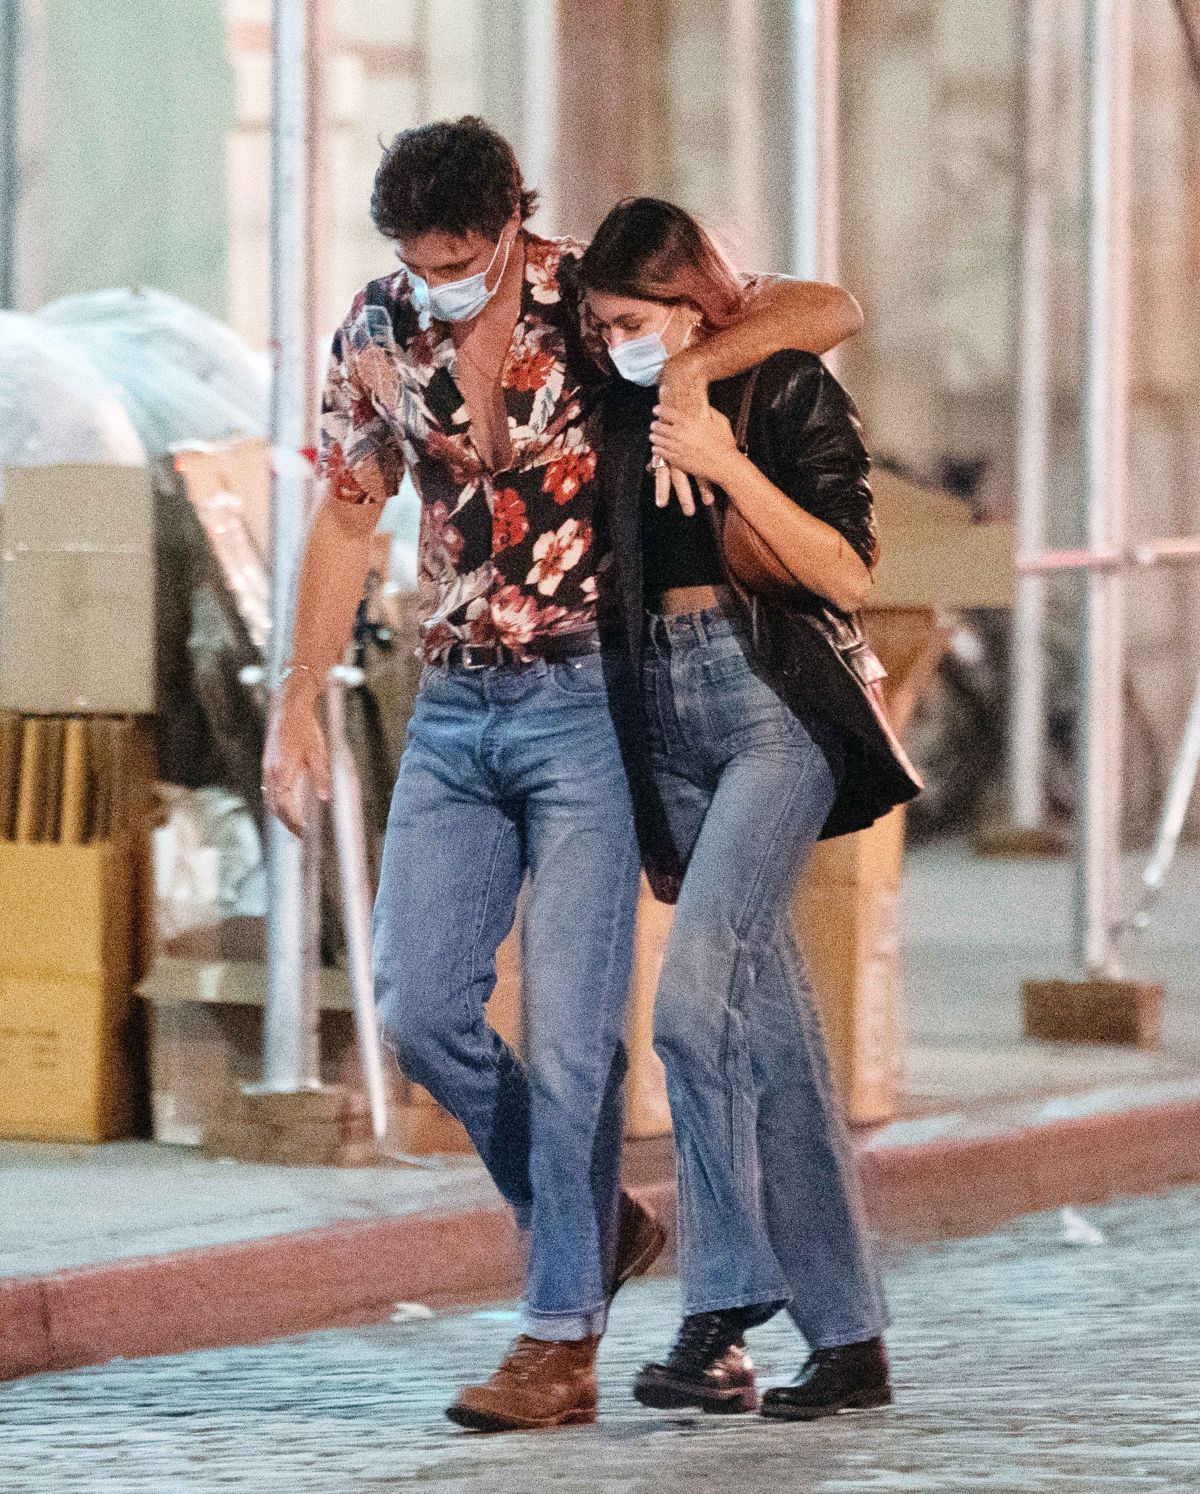 kaia-gerber-and-jacob-elordi-out-in-new-york-09-08-2020-3.jpg